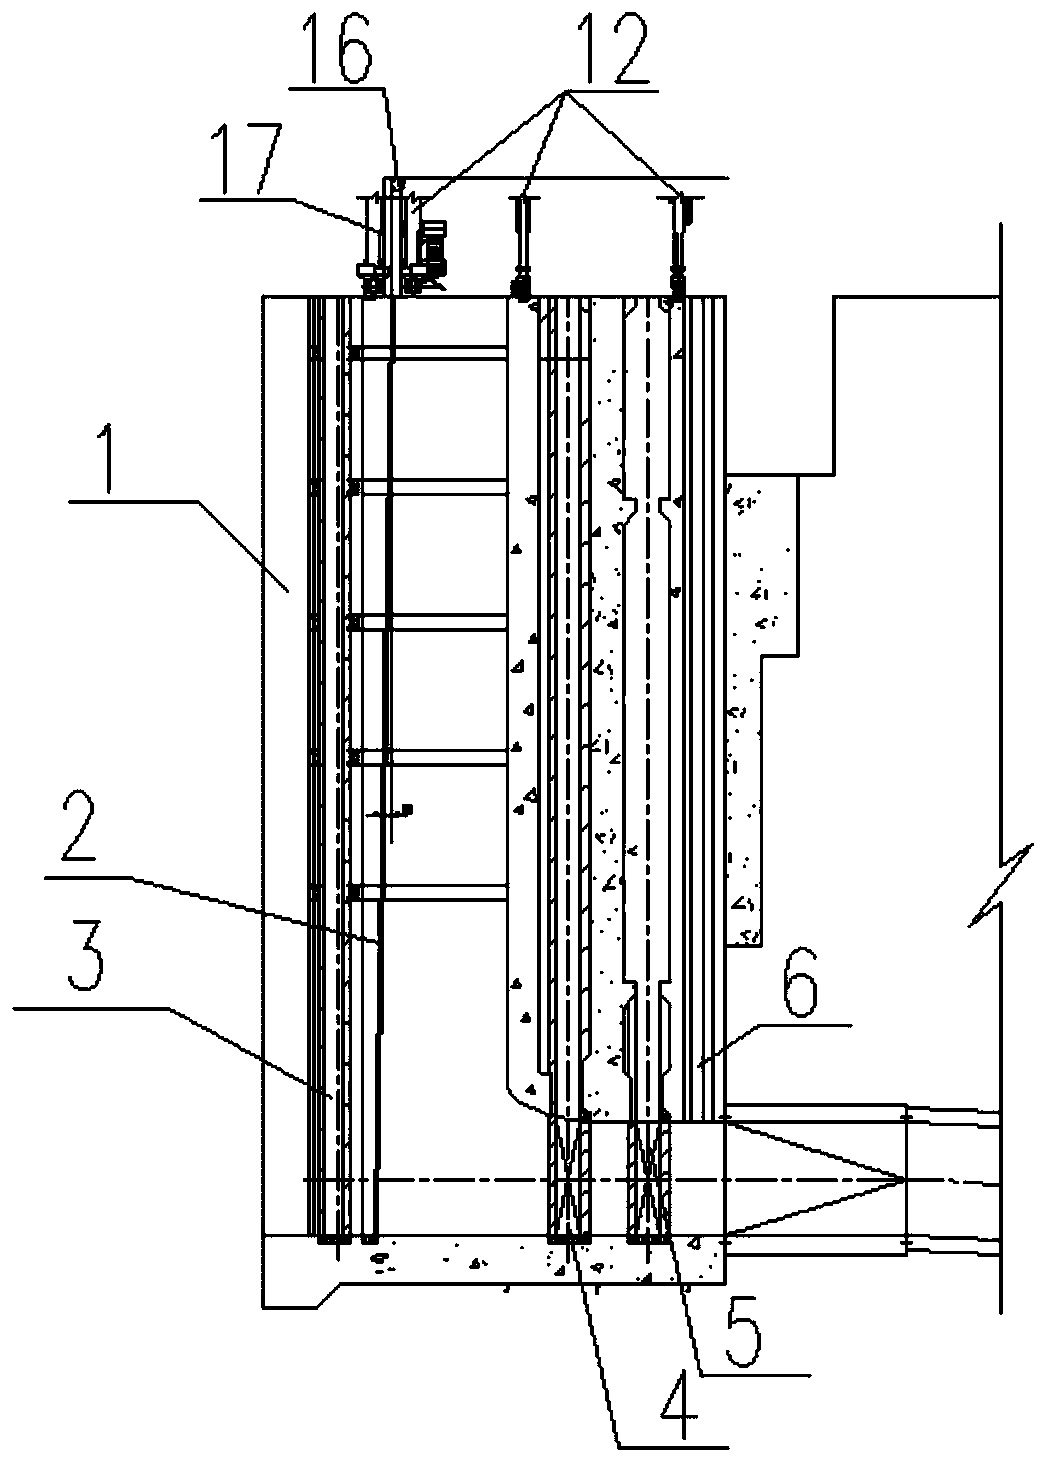 Automatic layered water taking system